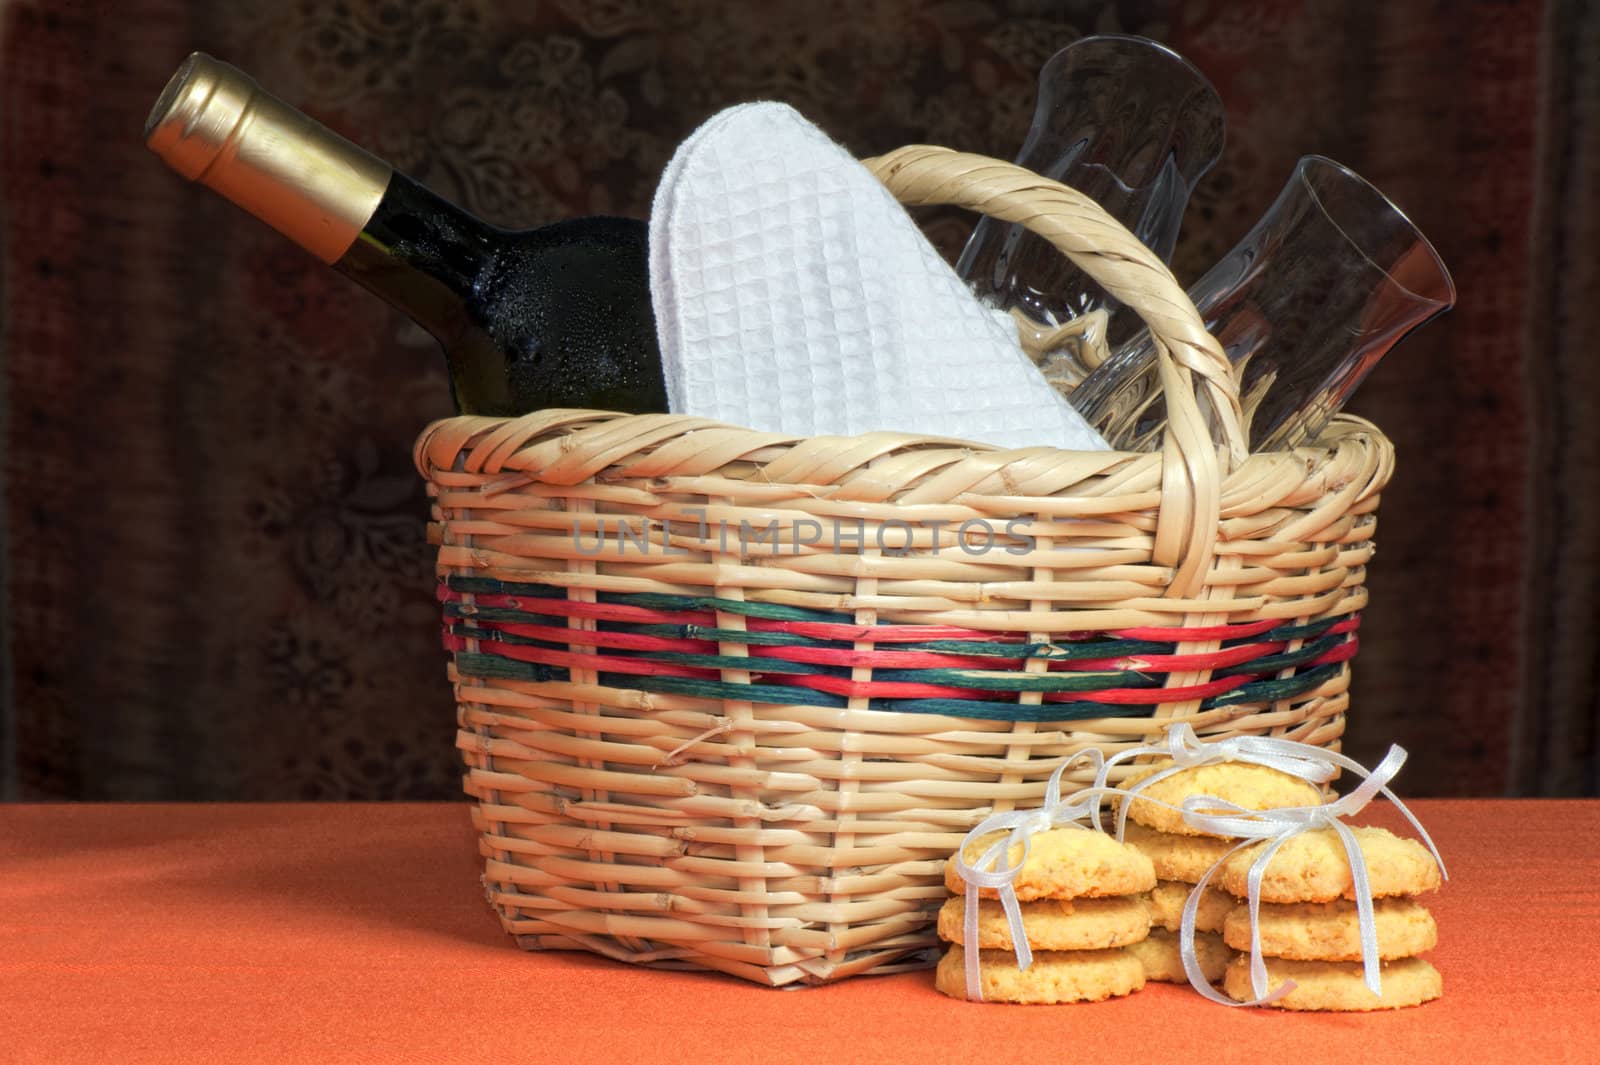 basket with bottles and glasses by carla720